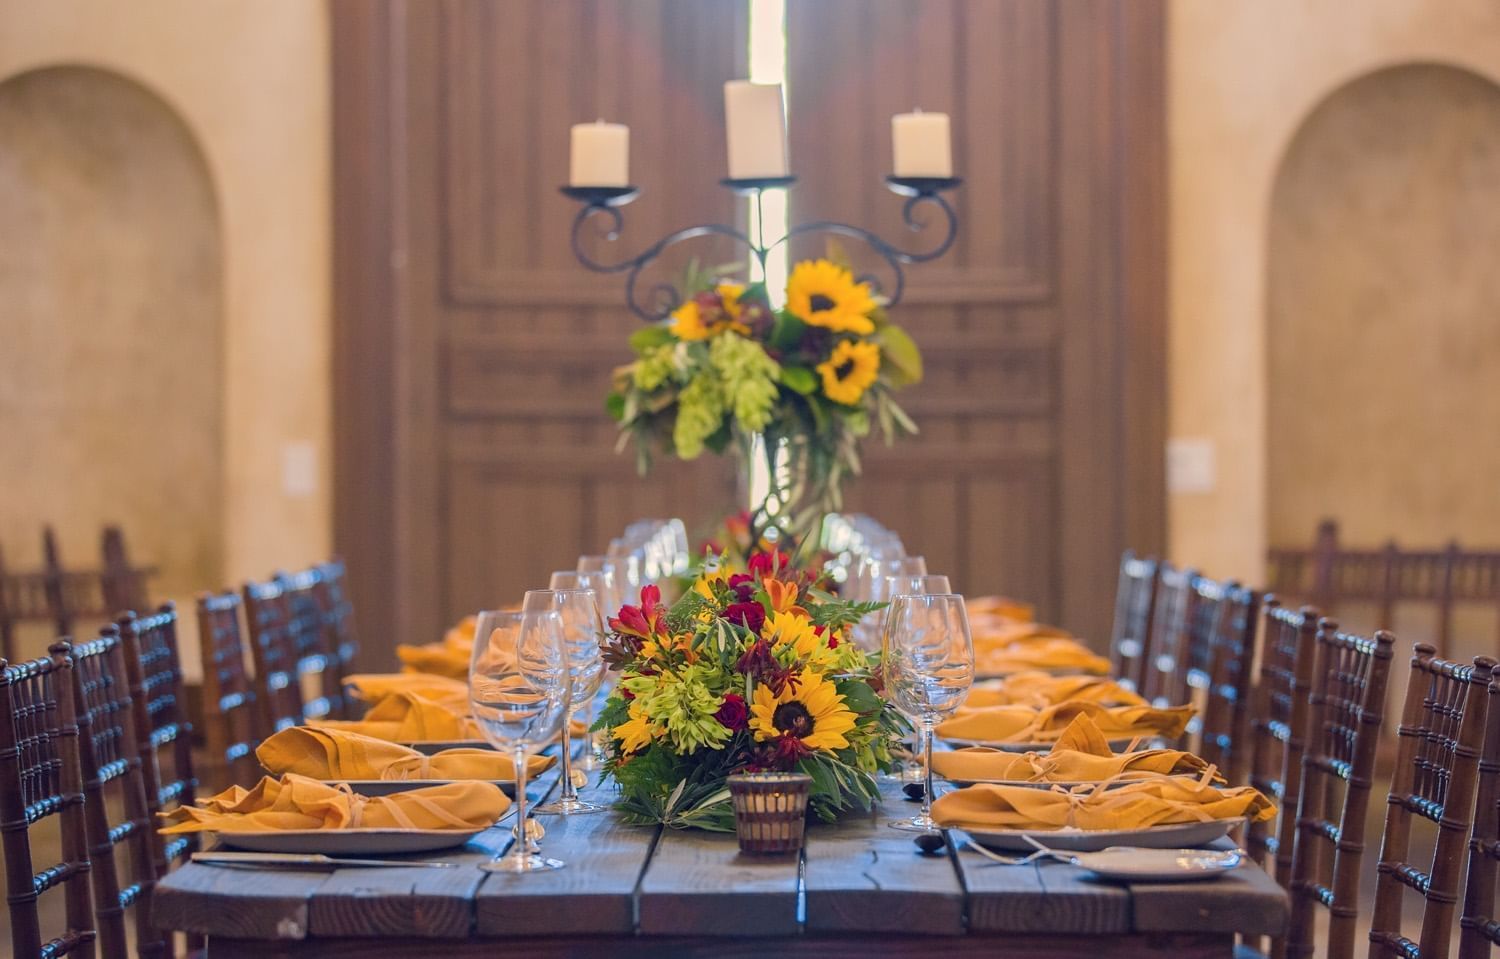 Private dining room area with sunflower center pieces